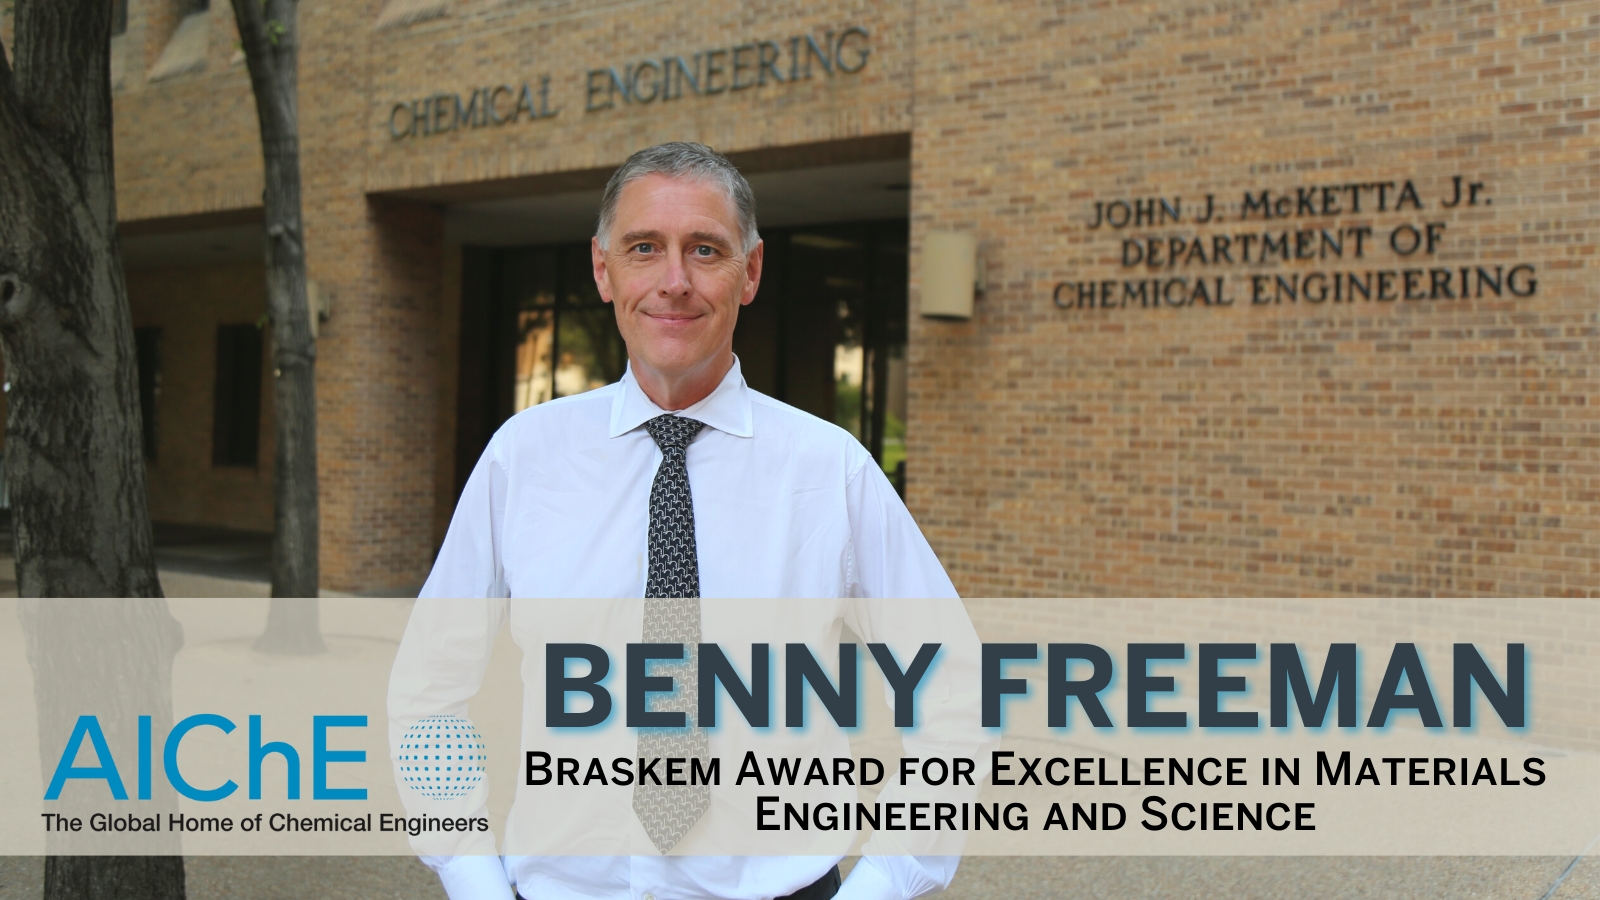 Beeny Freeman wins AICHE Braskem Award for Excellence in Materials Engineering and Science